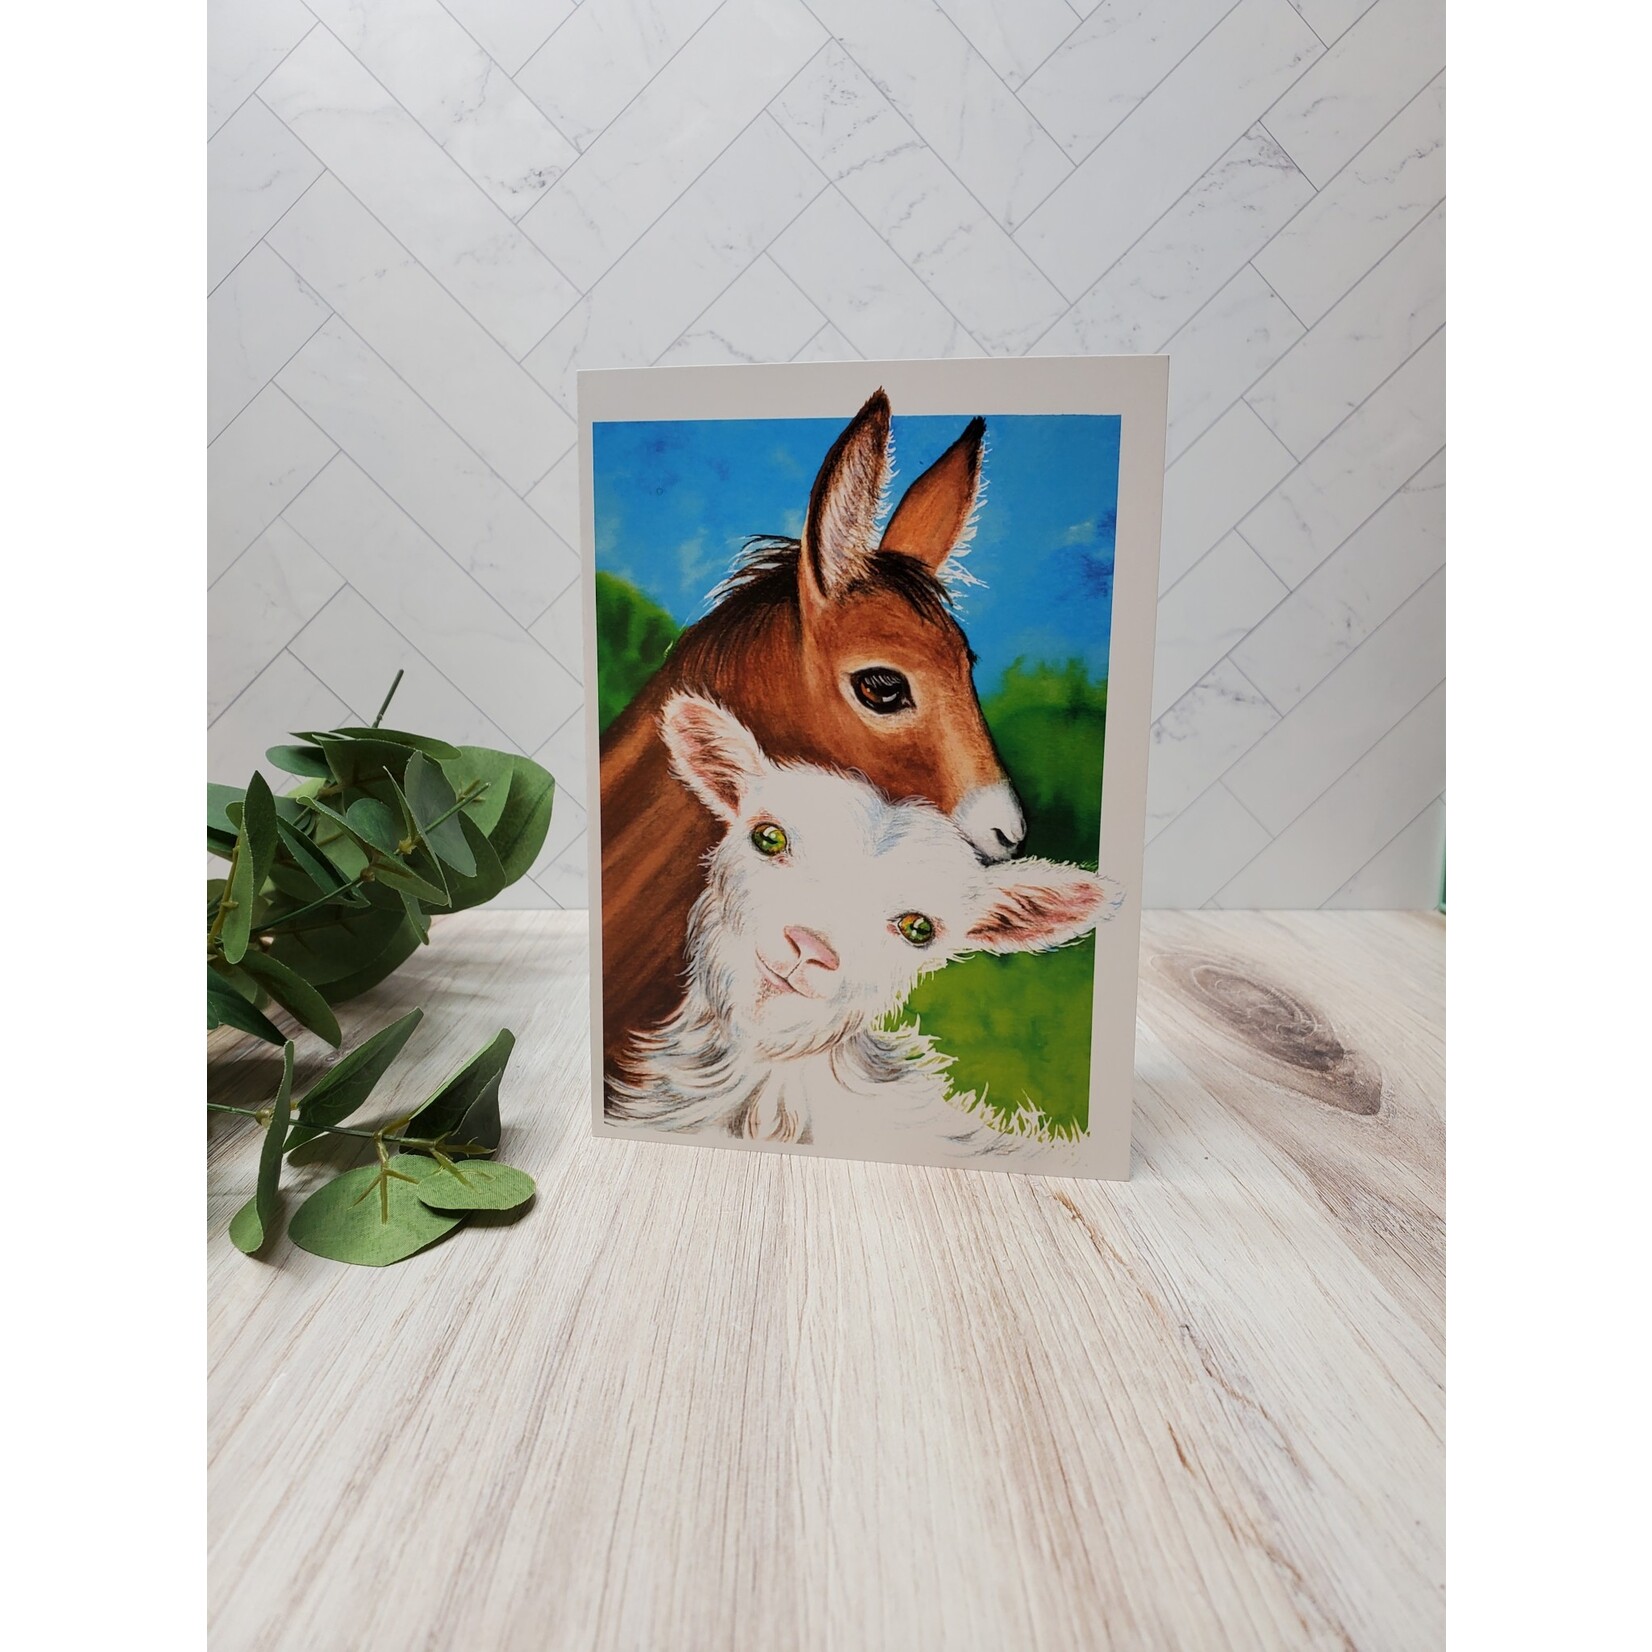 Bird in a Pine Donkey & Goat - Greeting Card